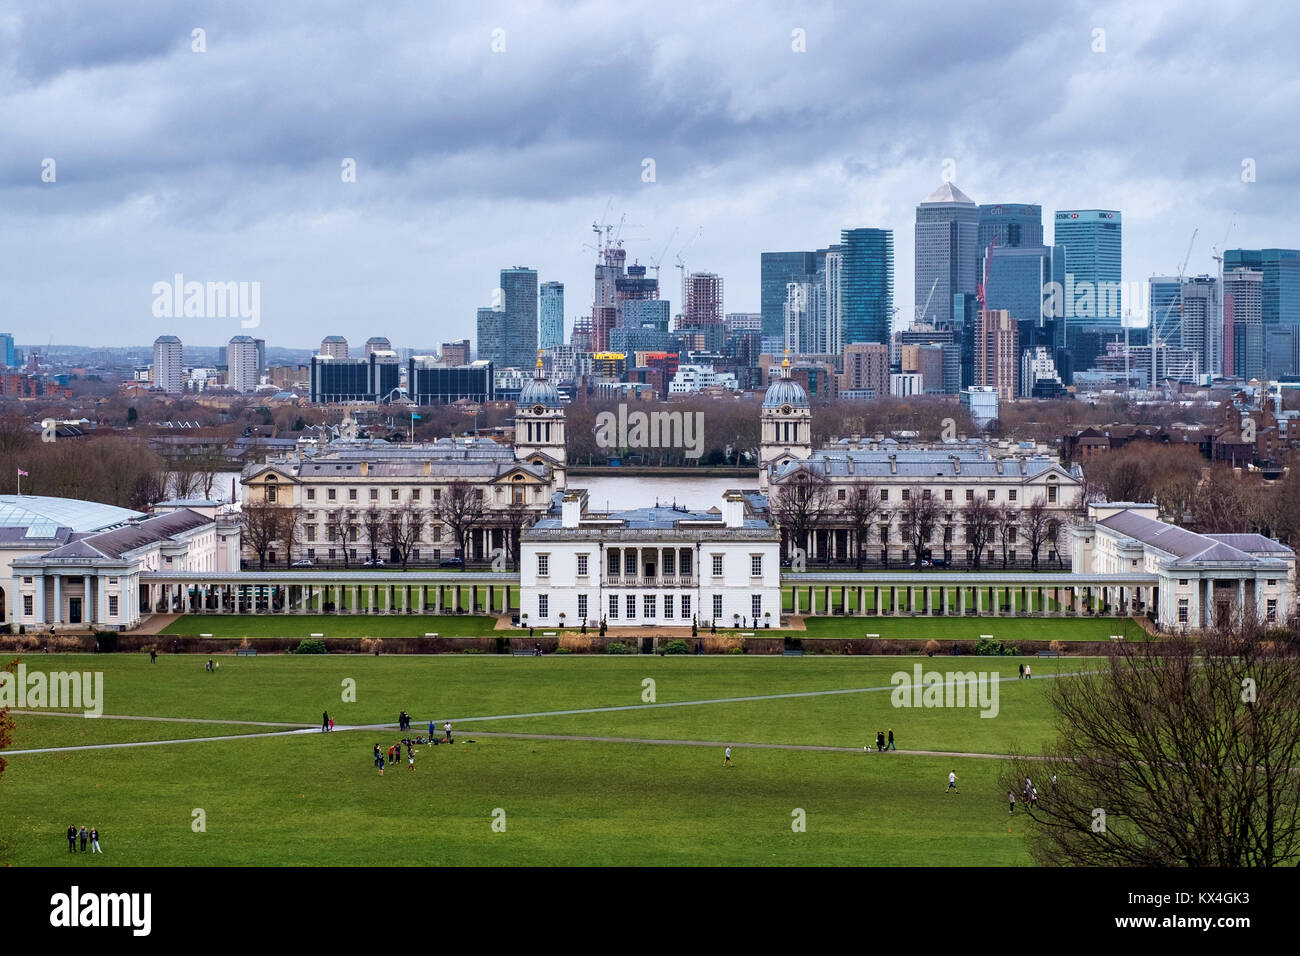 Londra Greenwich.Vista dal parco di Greenwich,Old Royal Naval College, Queen's House & Canary Wharf Banks & financial district su Isle of Dogs Foto Stock